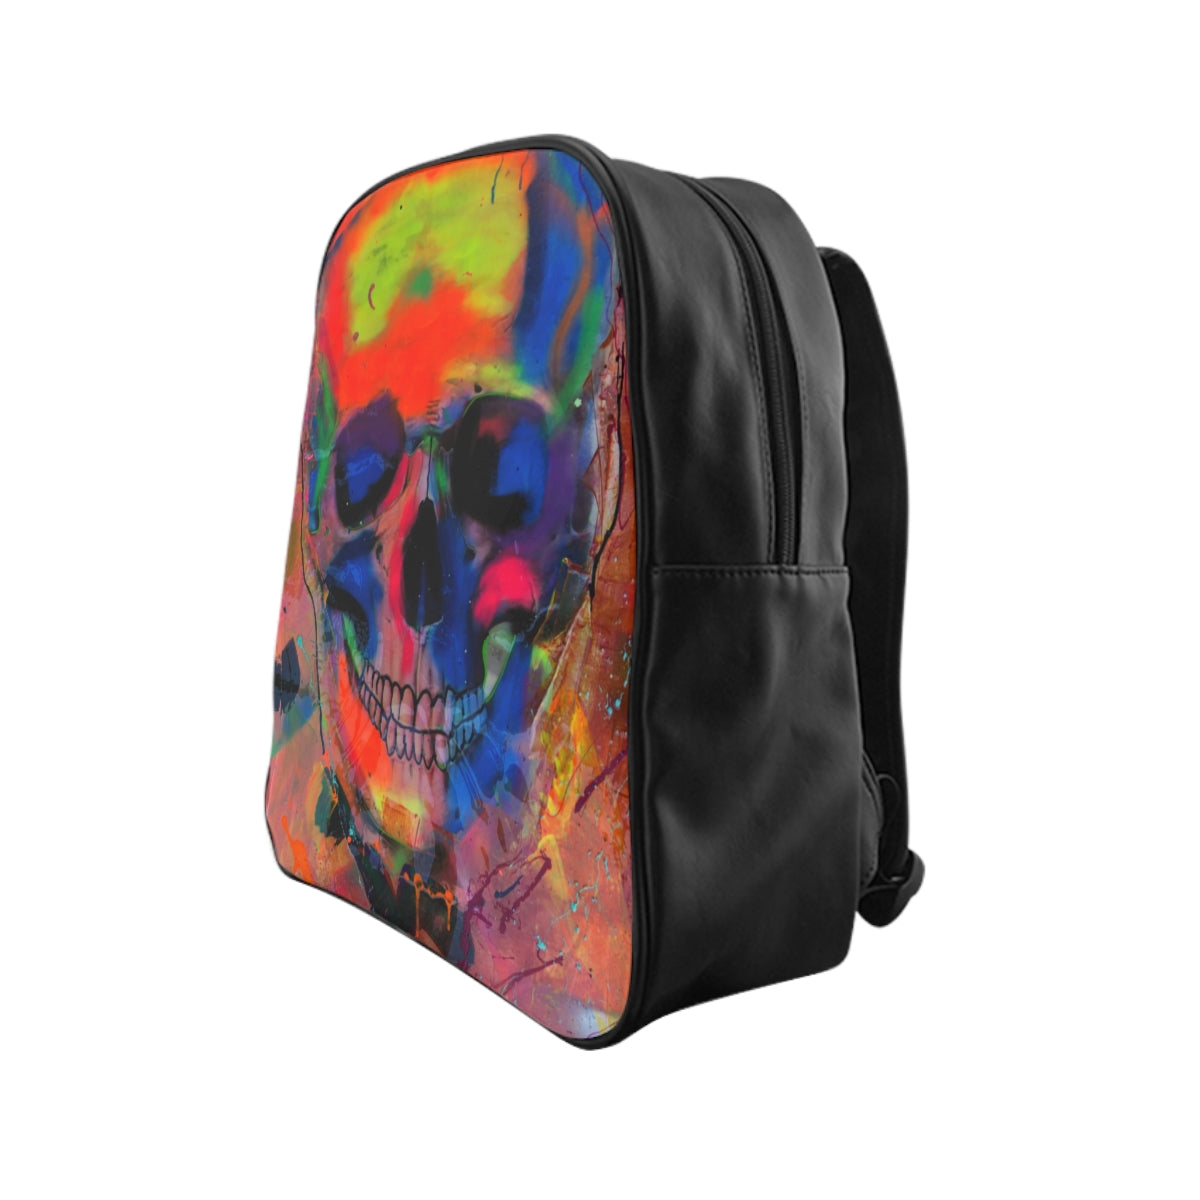 Getrott Eddy Bogaert Halloween Skull Graffiti Art Collection Poster 2 Black School Backpack Carry-On Travel Check Luggage 4-Wheel Spinner Suitcase Bag Multiple Colors and Sizes